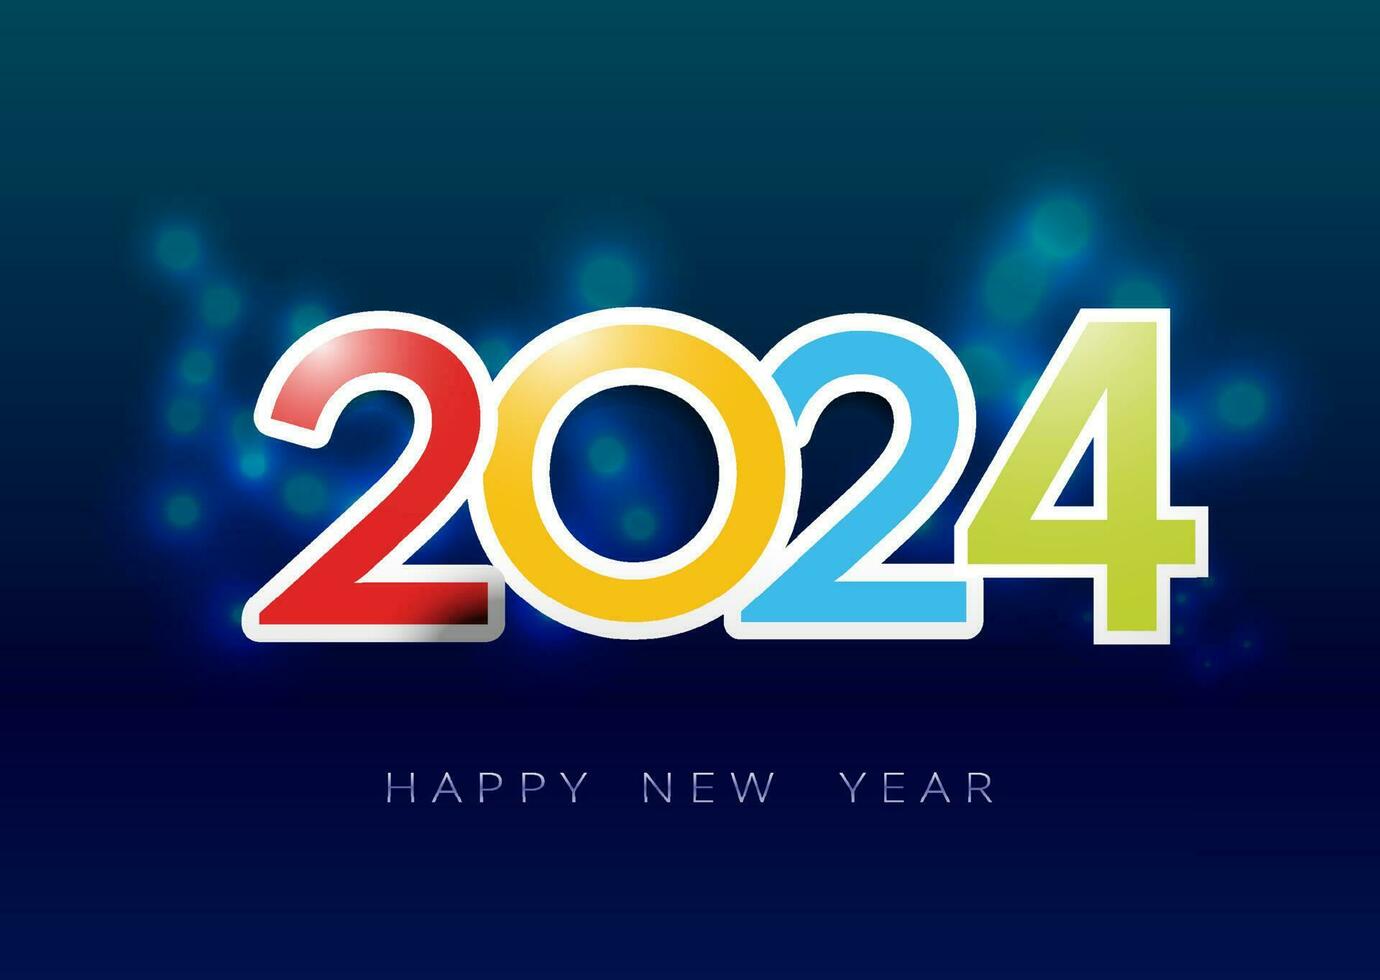 Happy new year 2024 background. Holiday greeting card design vector